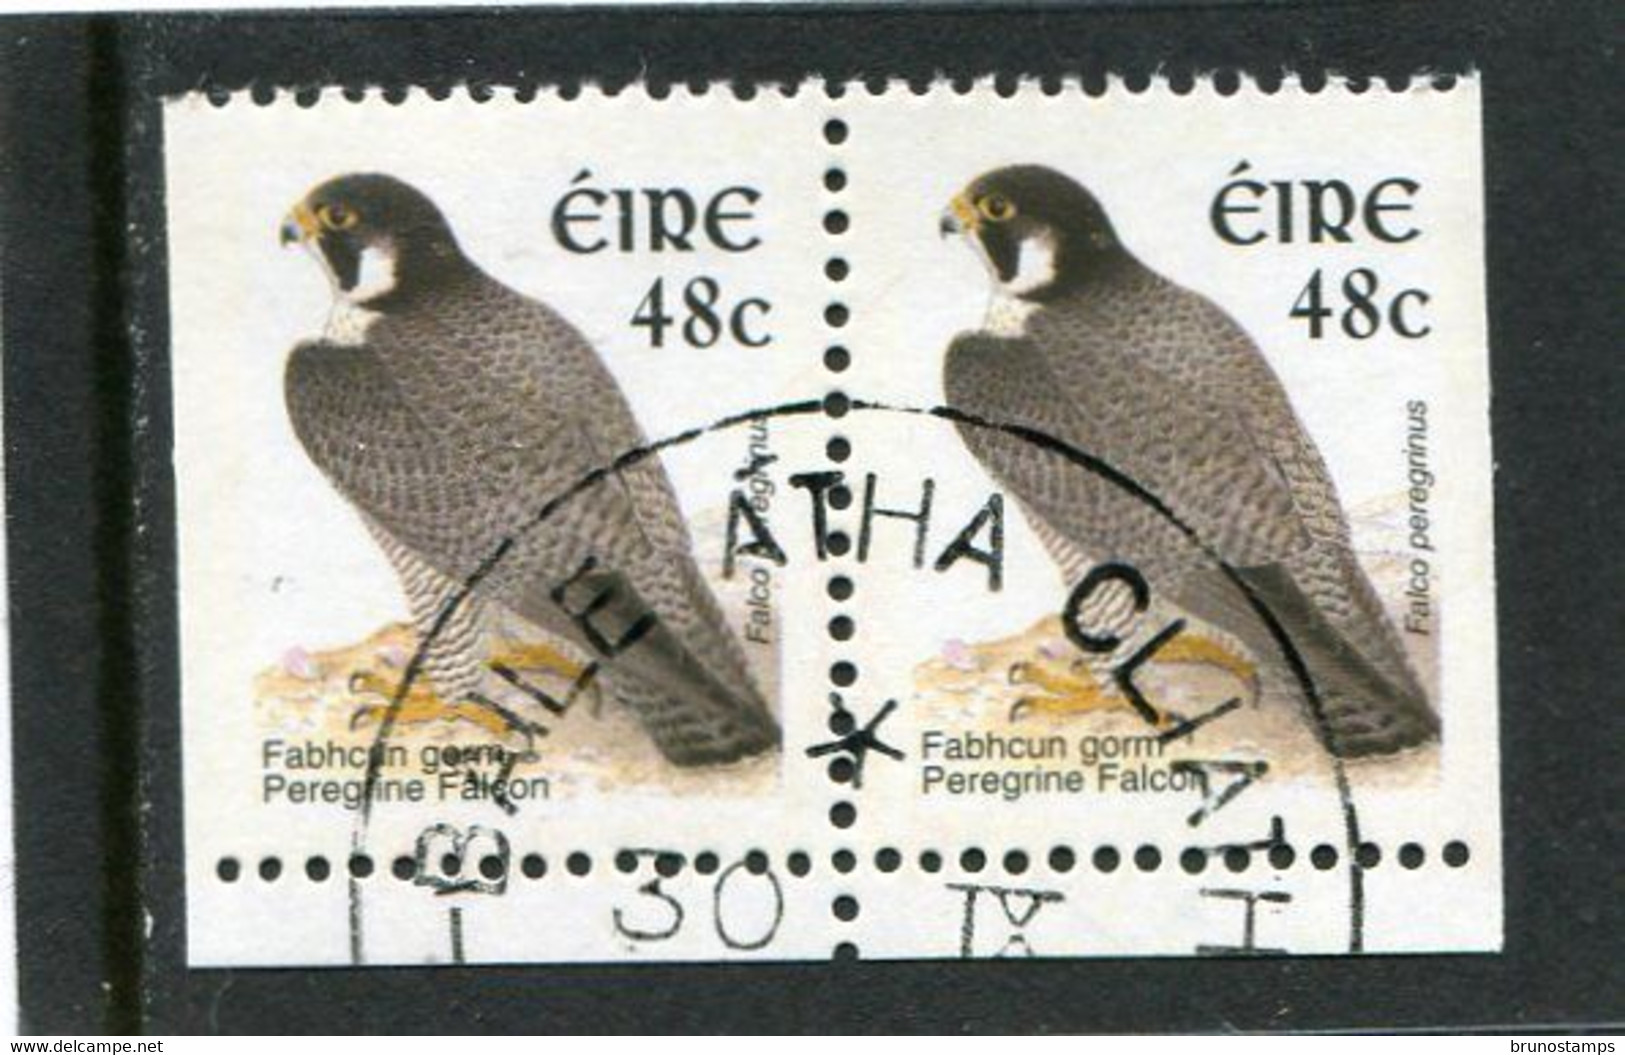 IRELAND/EIRE - 2003  48c  BIRDS  SMALLER SIZE PAIR  EX BOOKLET  FINE USED - Used Stamps